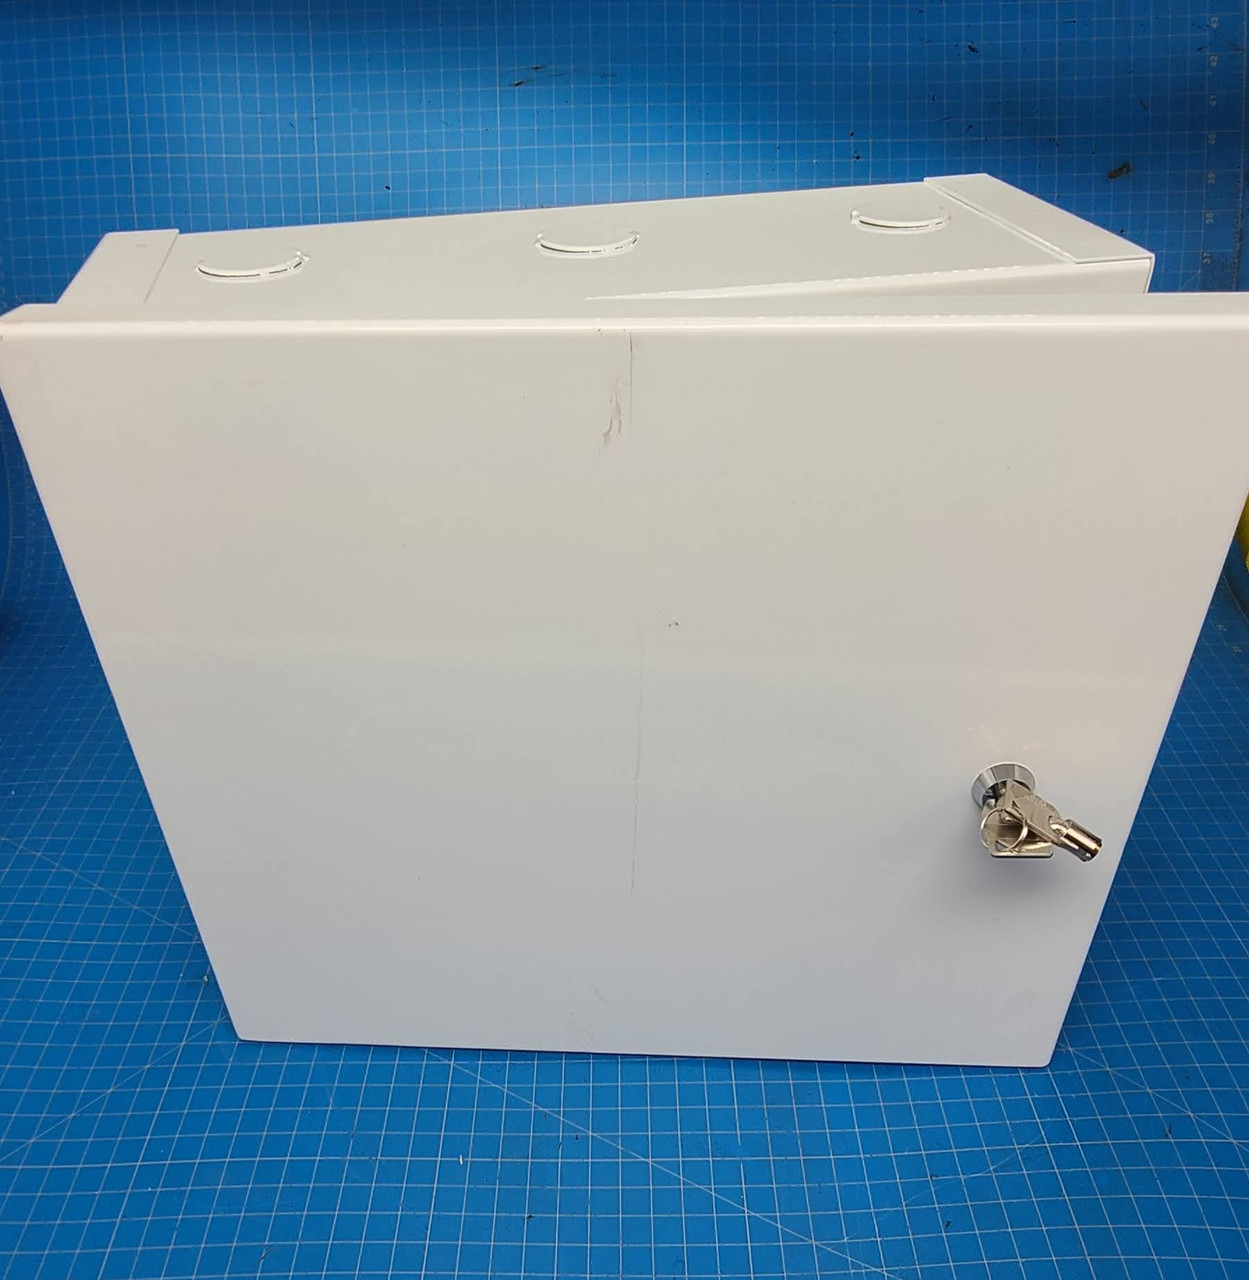 Multi-Purpose Industrial Lockable Cabinet 33 x 22 x 9 White Steel Surface Mounted (6) 2.5" KO Top CAB230